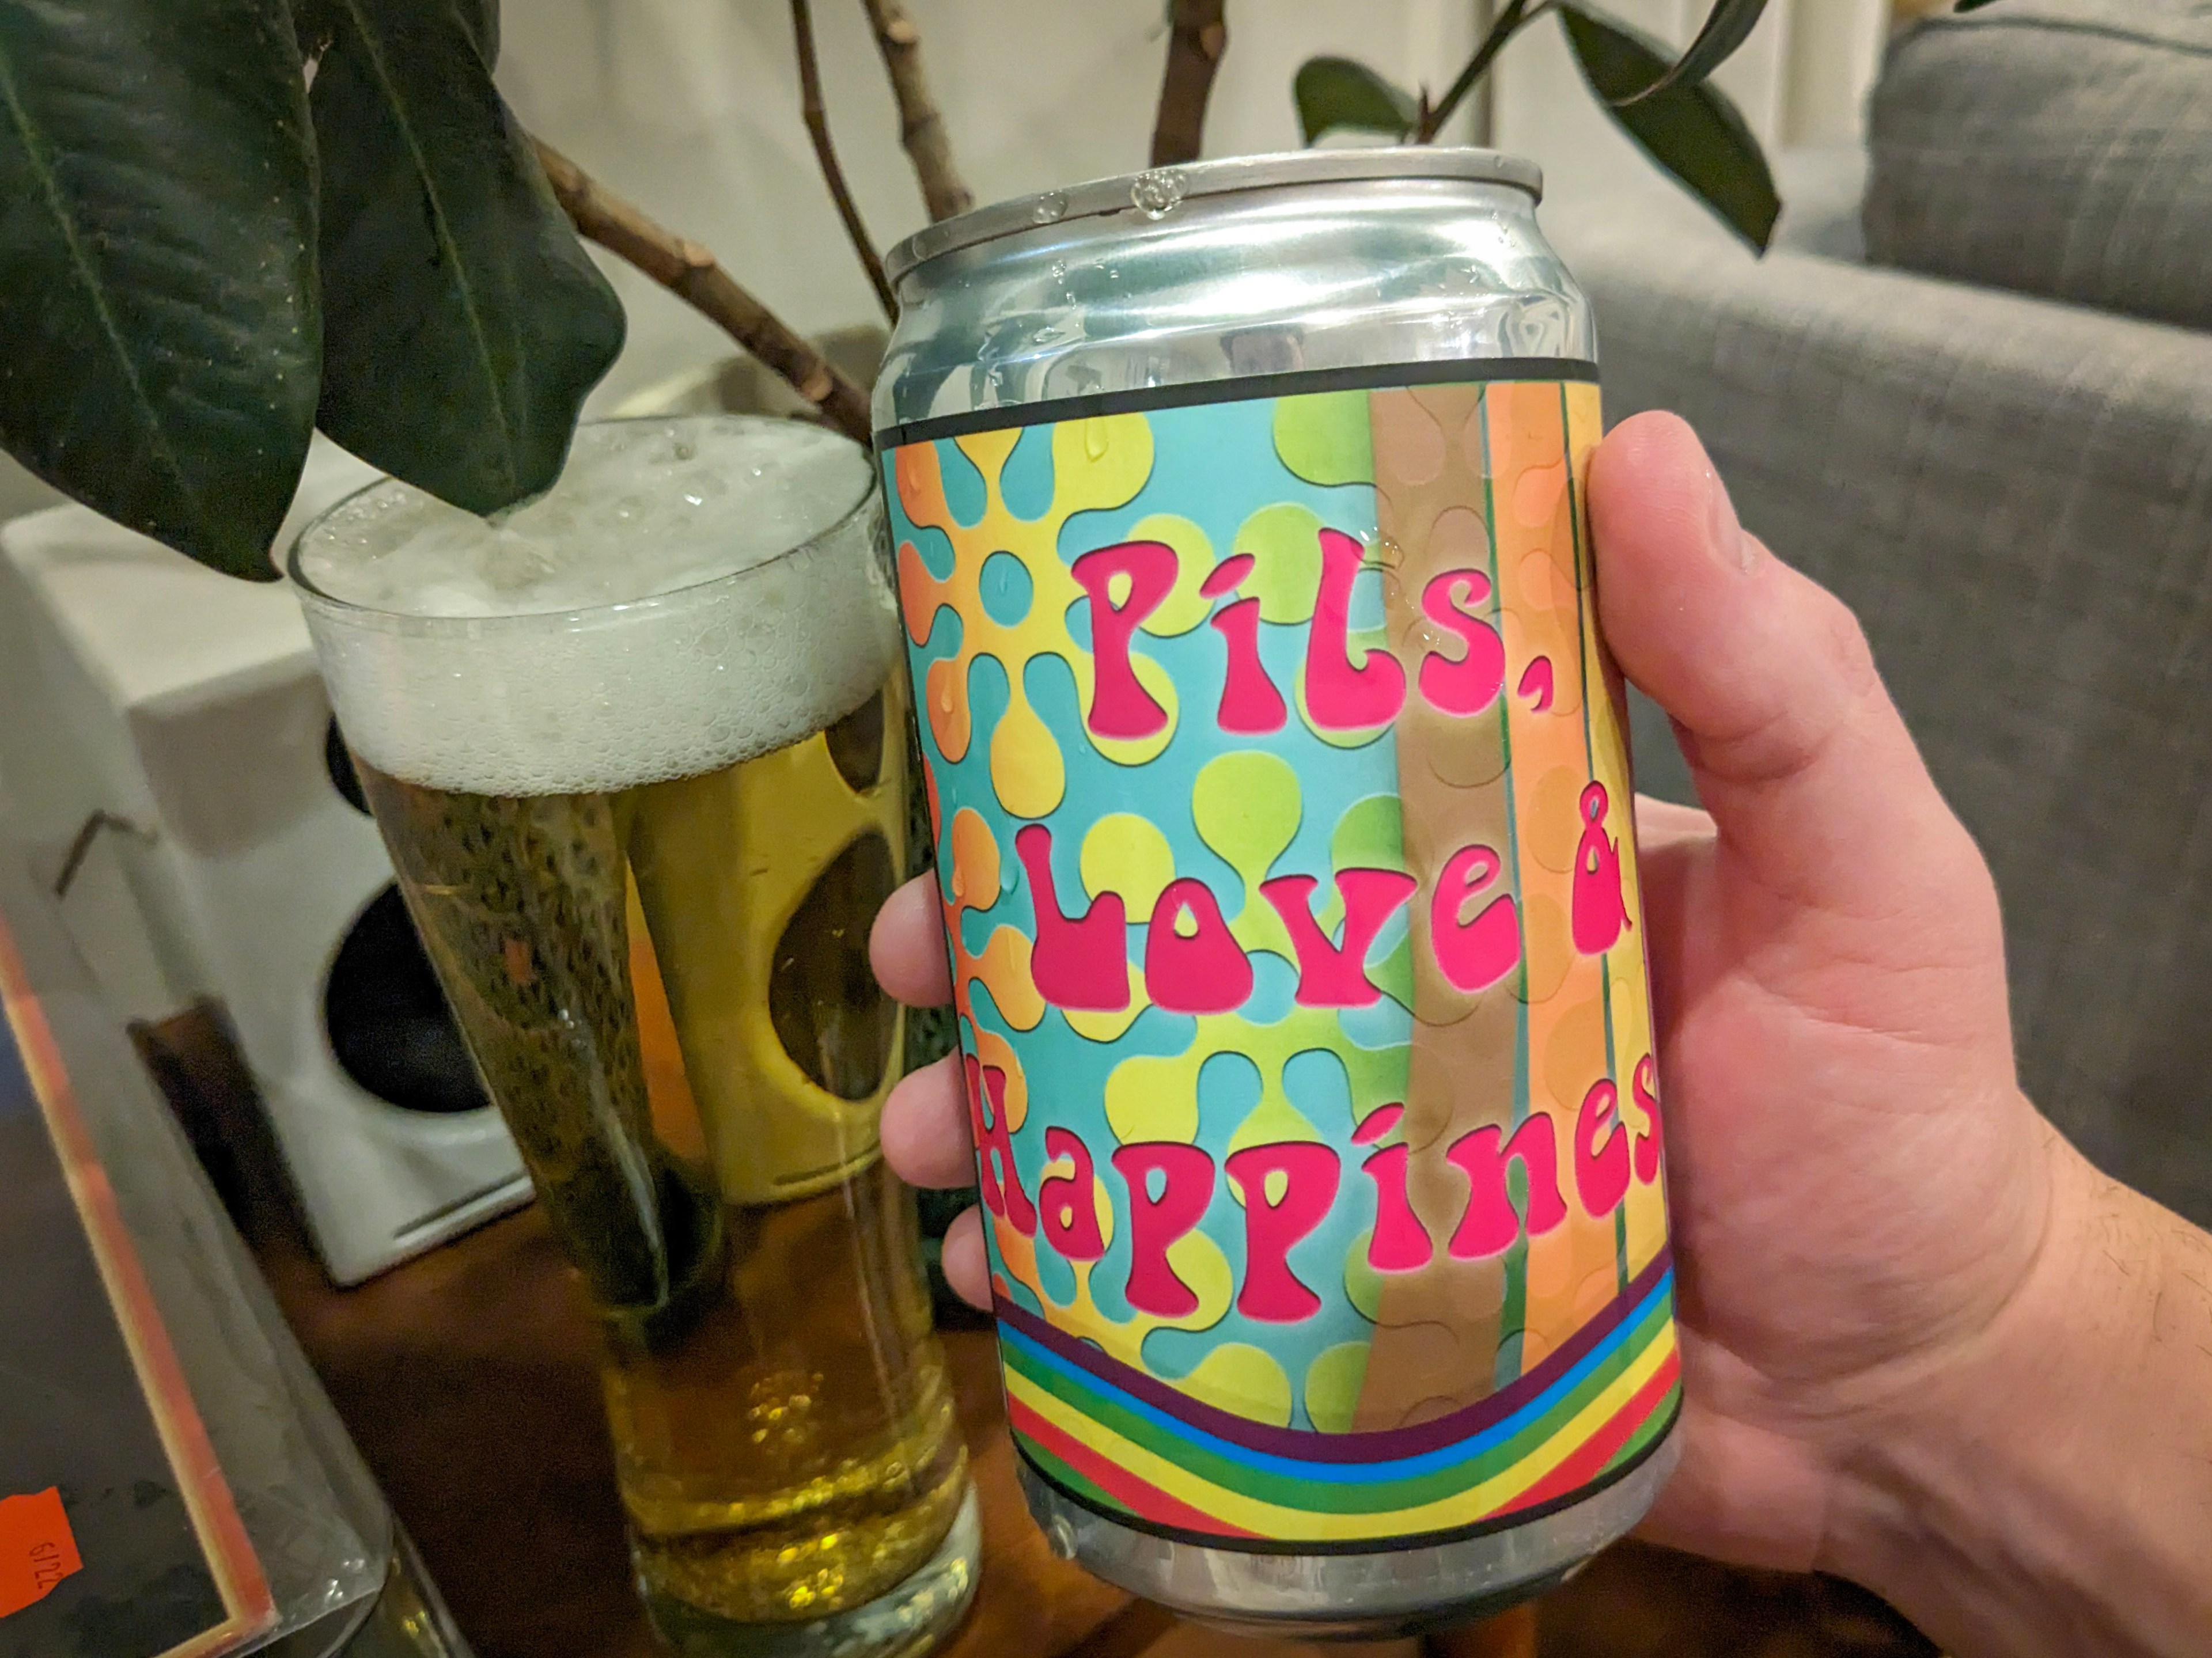 the 70s-inspired crowler can for pils, love, and happiness